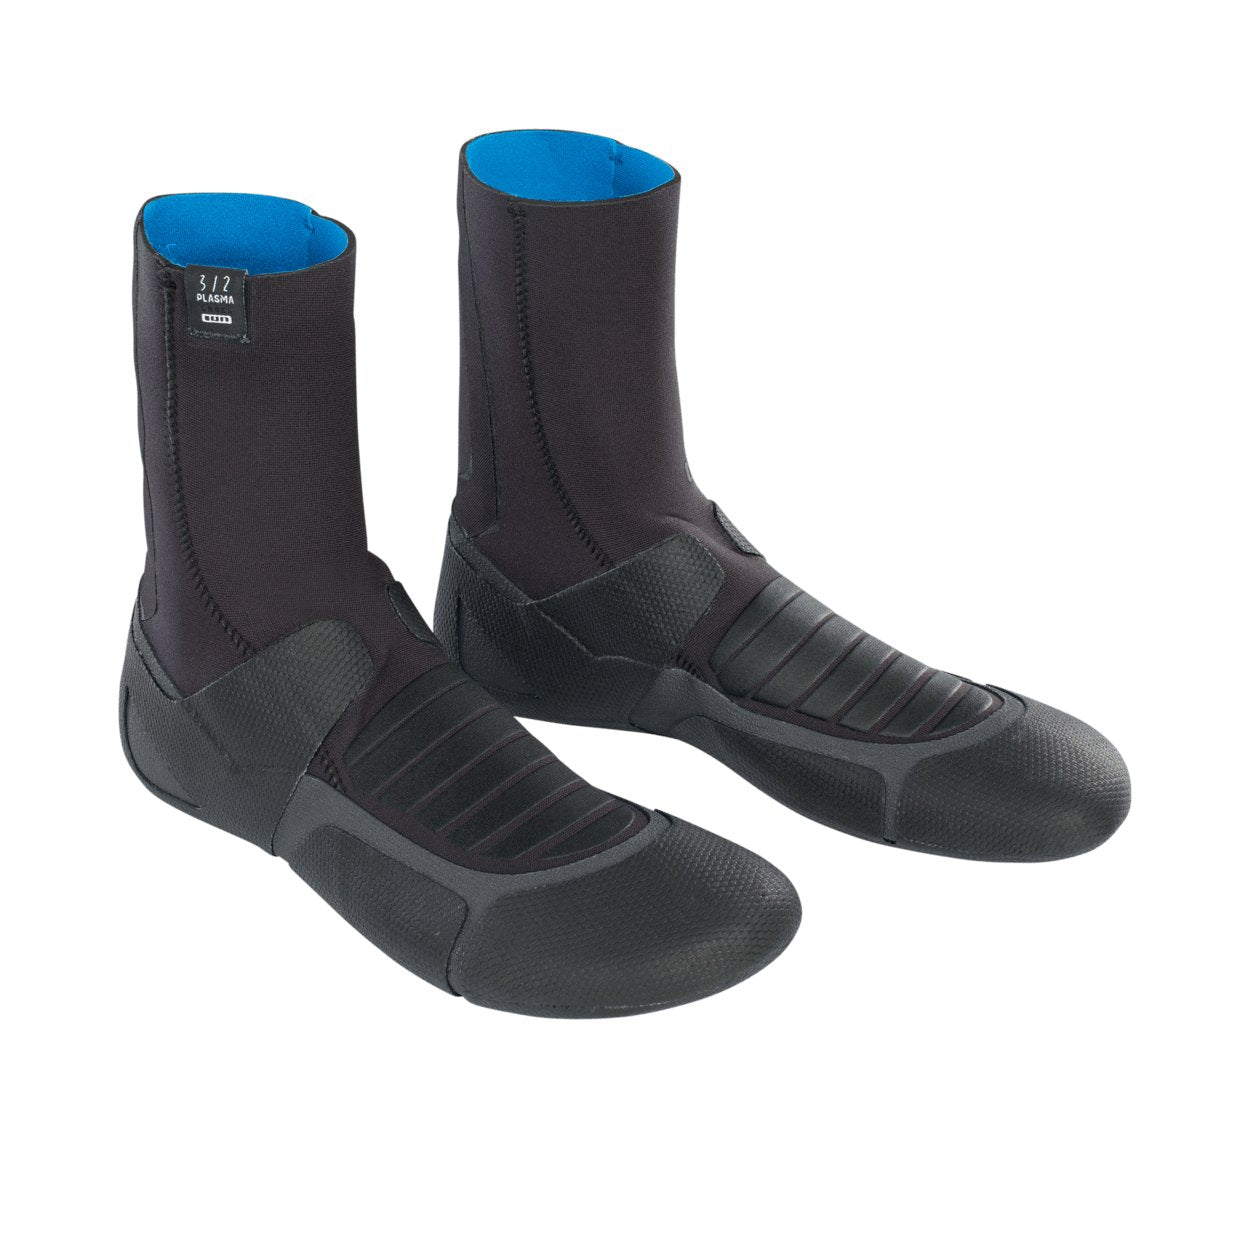 ION Plasma Boots 3/2 Round Toe 2022 - Worthing Watersports - 9010583059334 - Footwear - ION Water